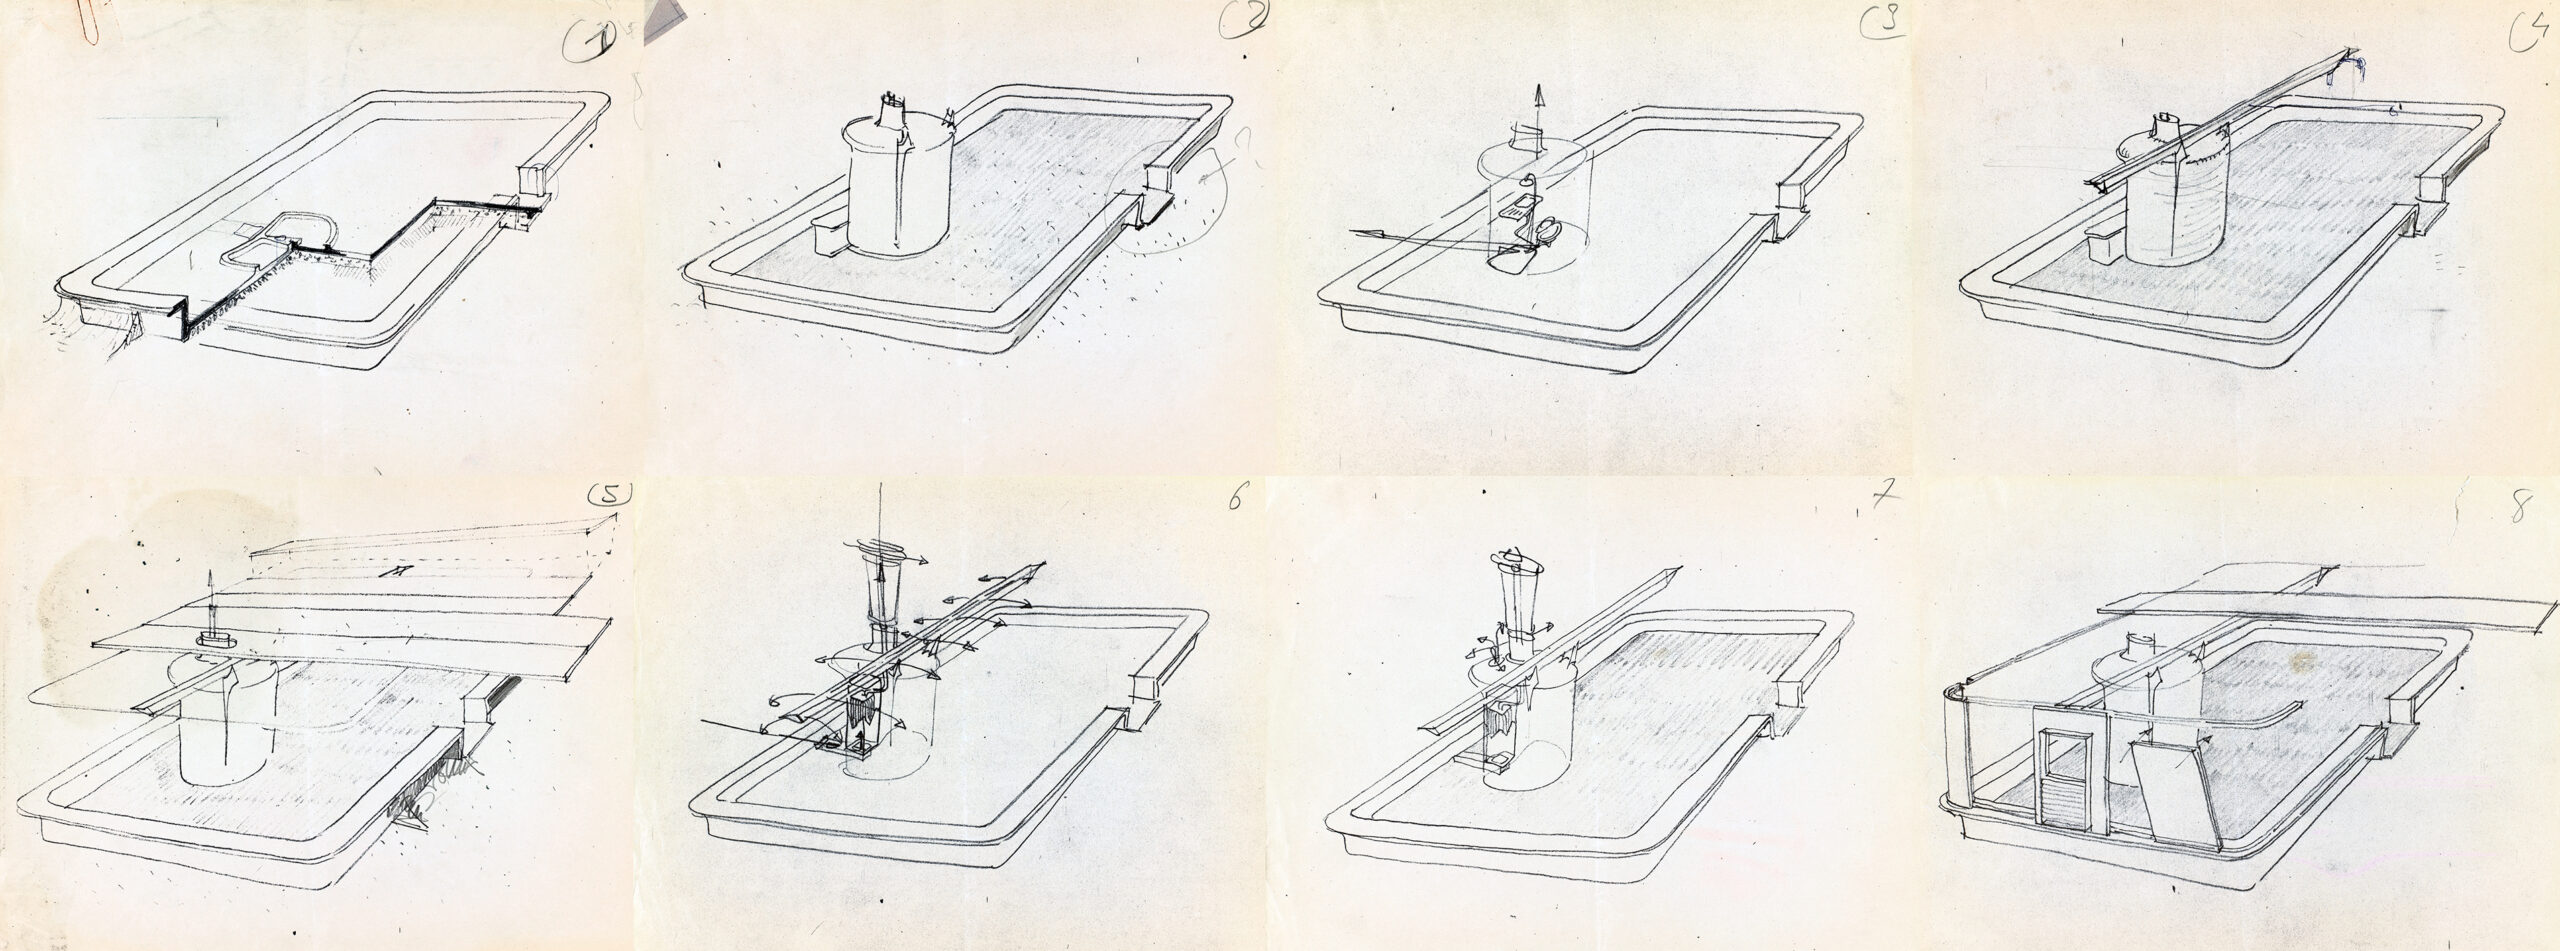 Steps in the assembly of the Jours Meilleurs demountable house. Drawings attributed to Jean Prouvé, ca. 1956.